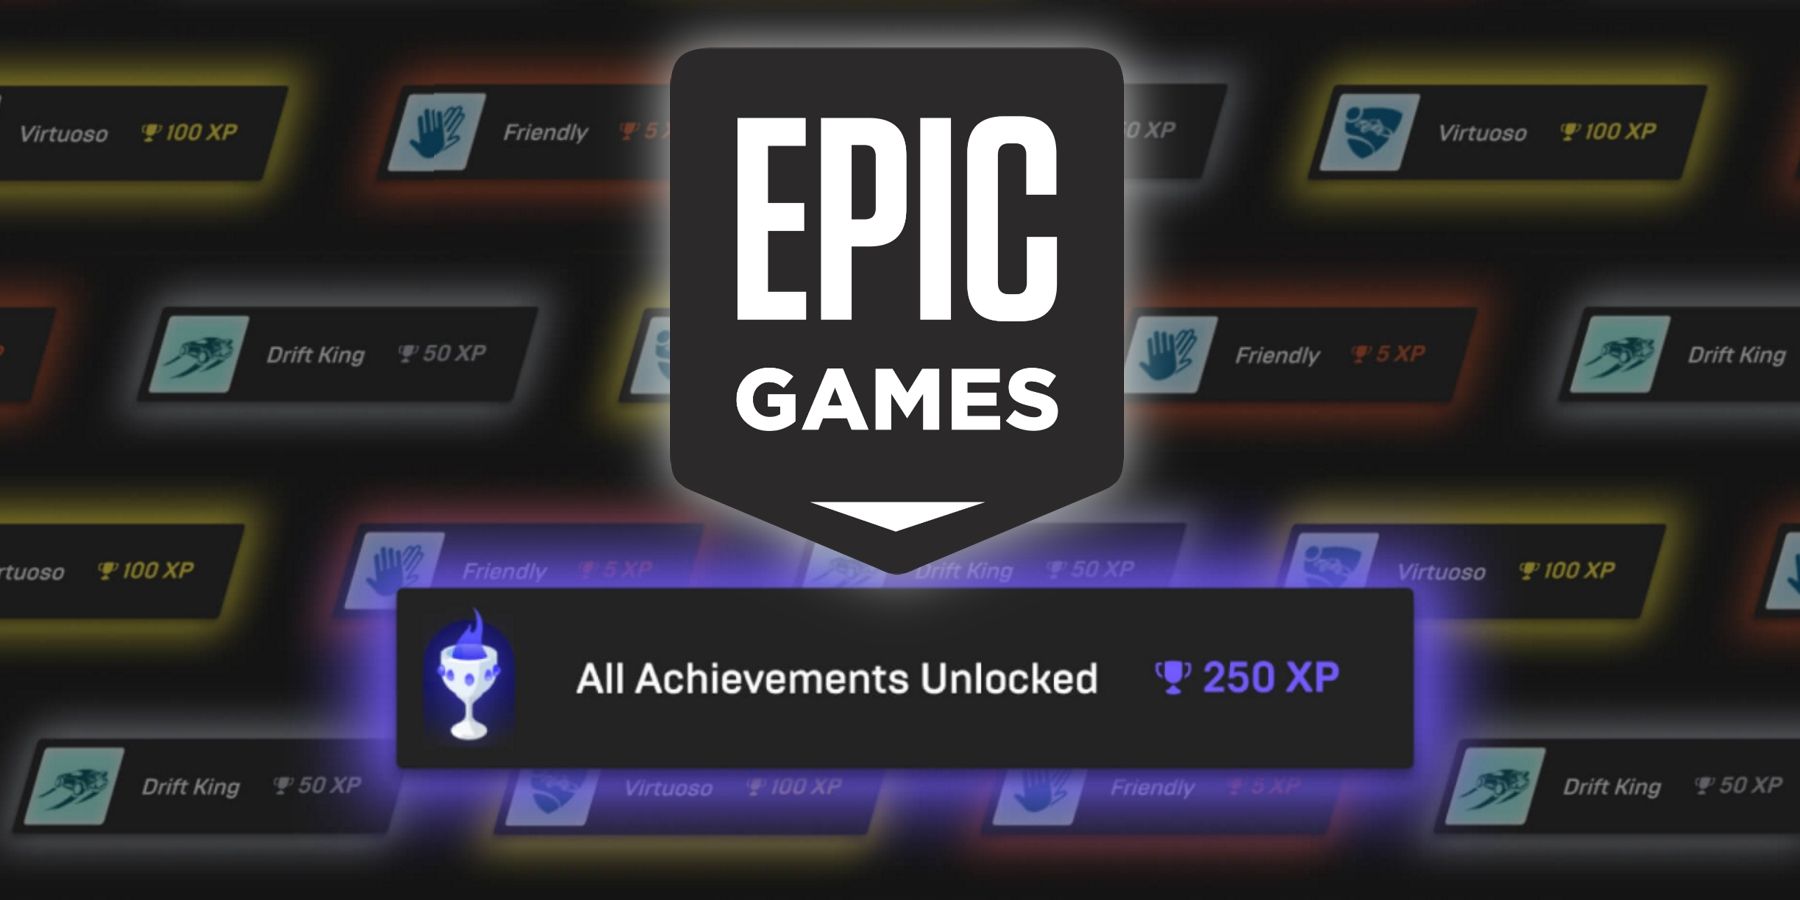 User reviews and achievements on Epic Games Store roadmap